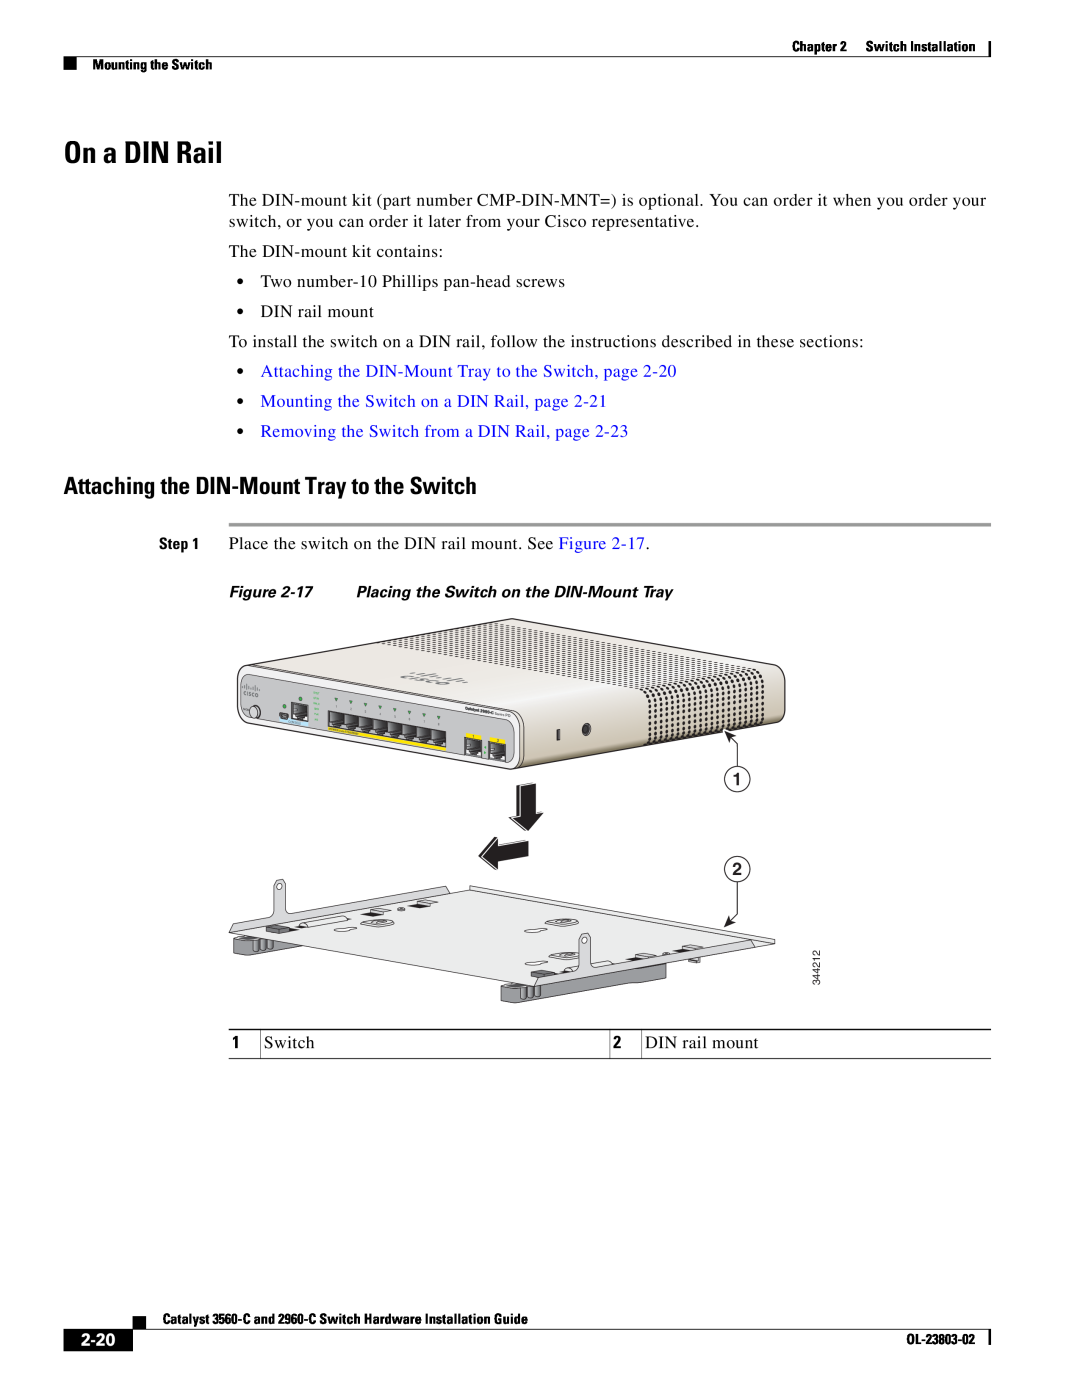 Cisco Systems 3560-C On a DIN Rail, Attaching the DIN-Mount Tray to the Switch, Mounting the Switch on a DIN Rail, page 